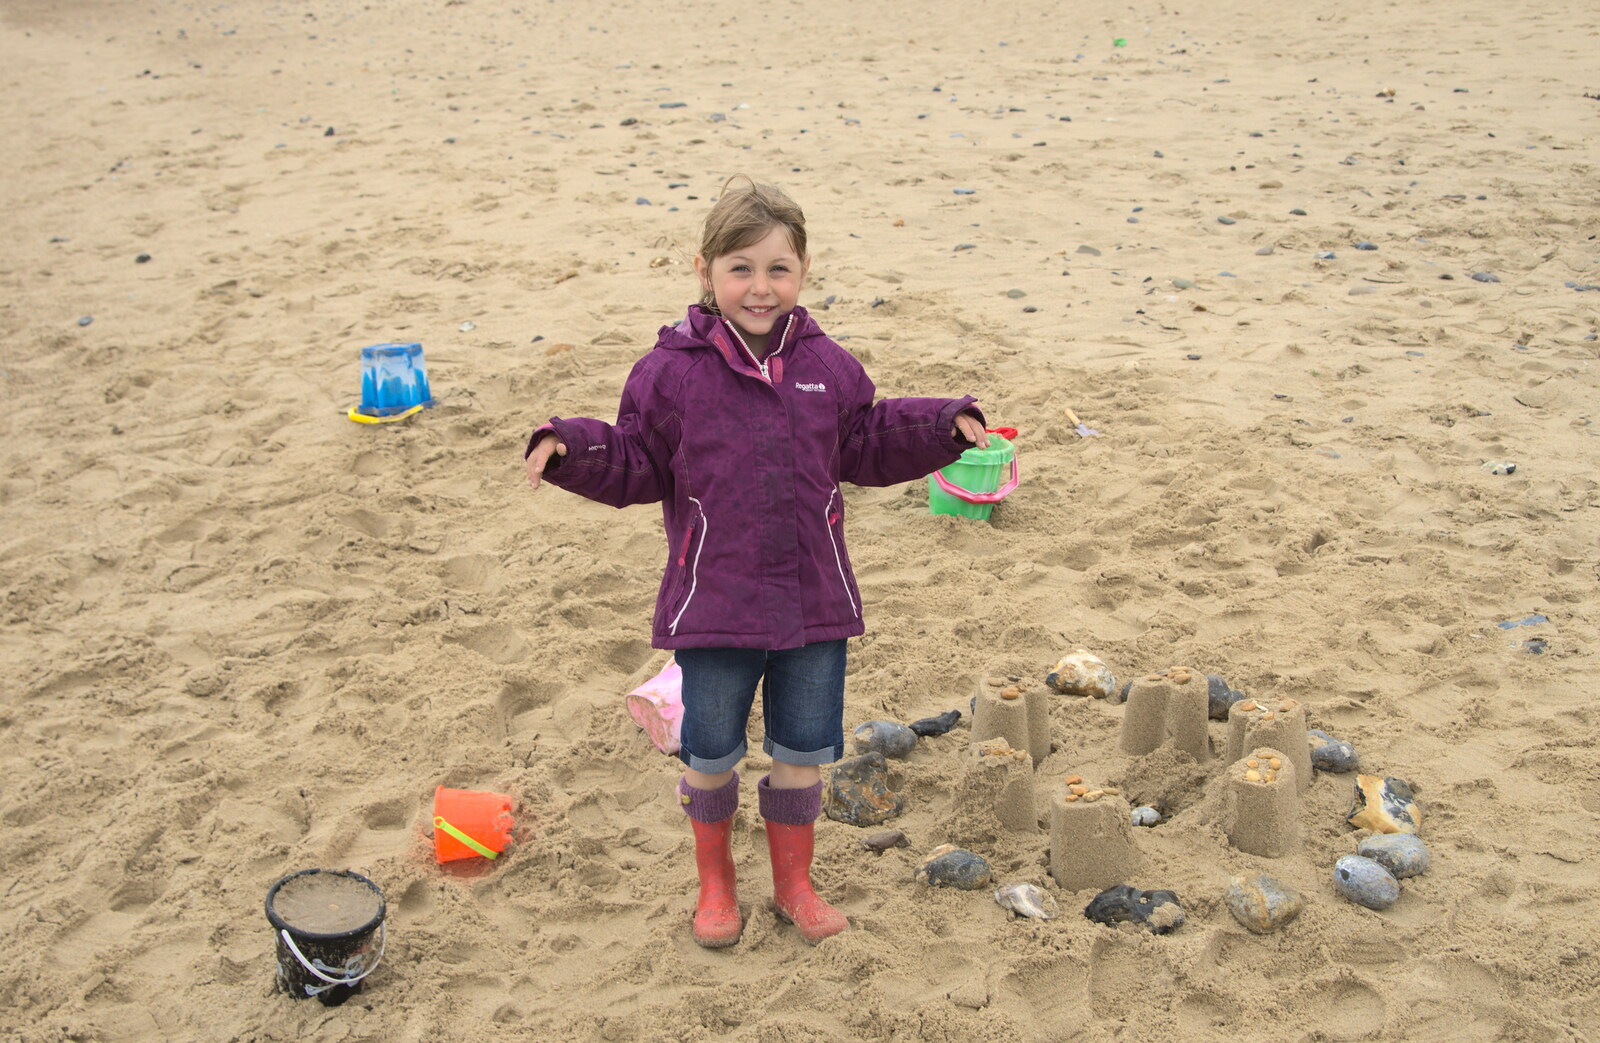 Soph the Roph shows off her sandcastle from A Wet Weekend of Camping, Waxham Sands, Norfolk - 13th June 2015